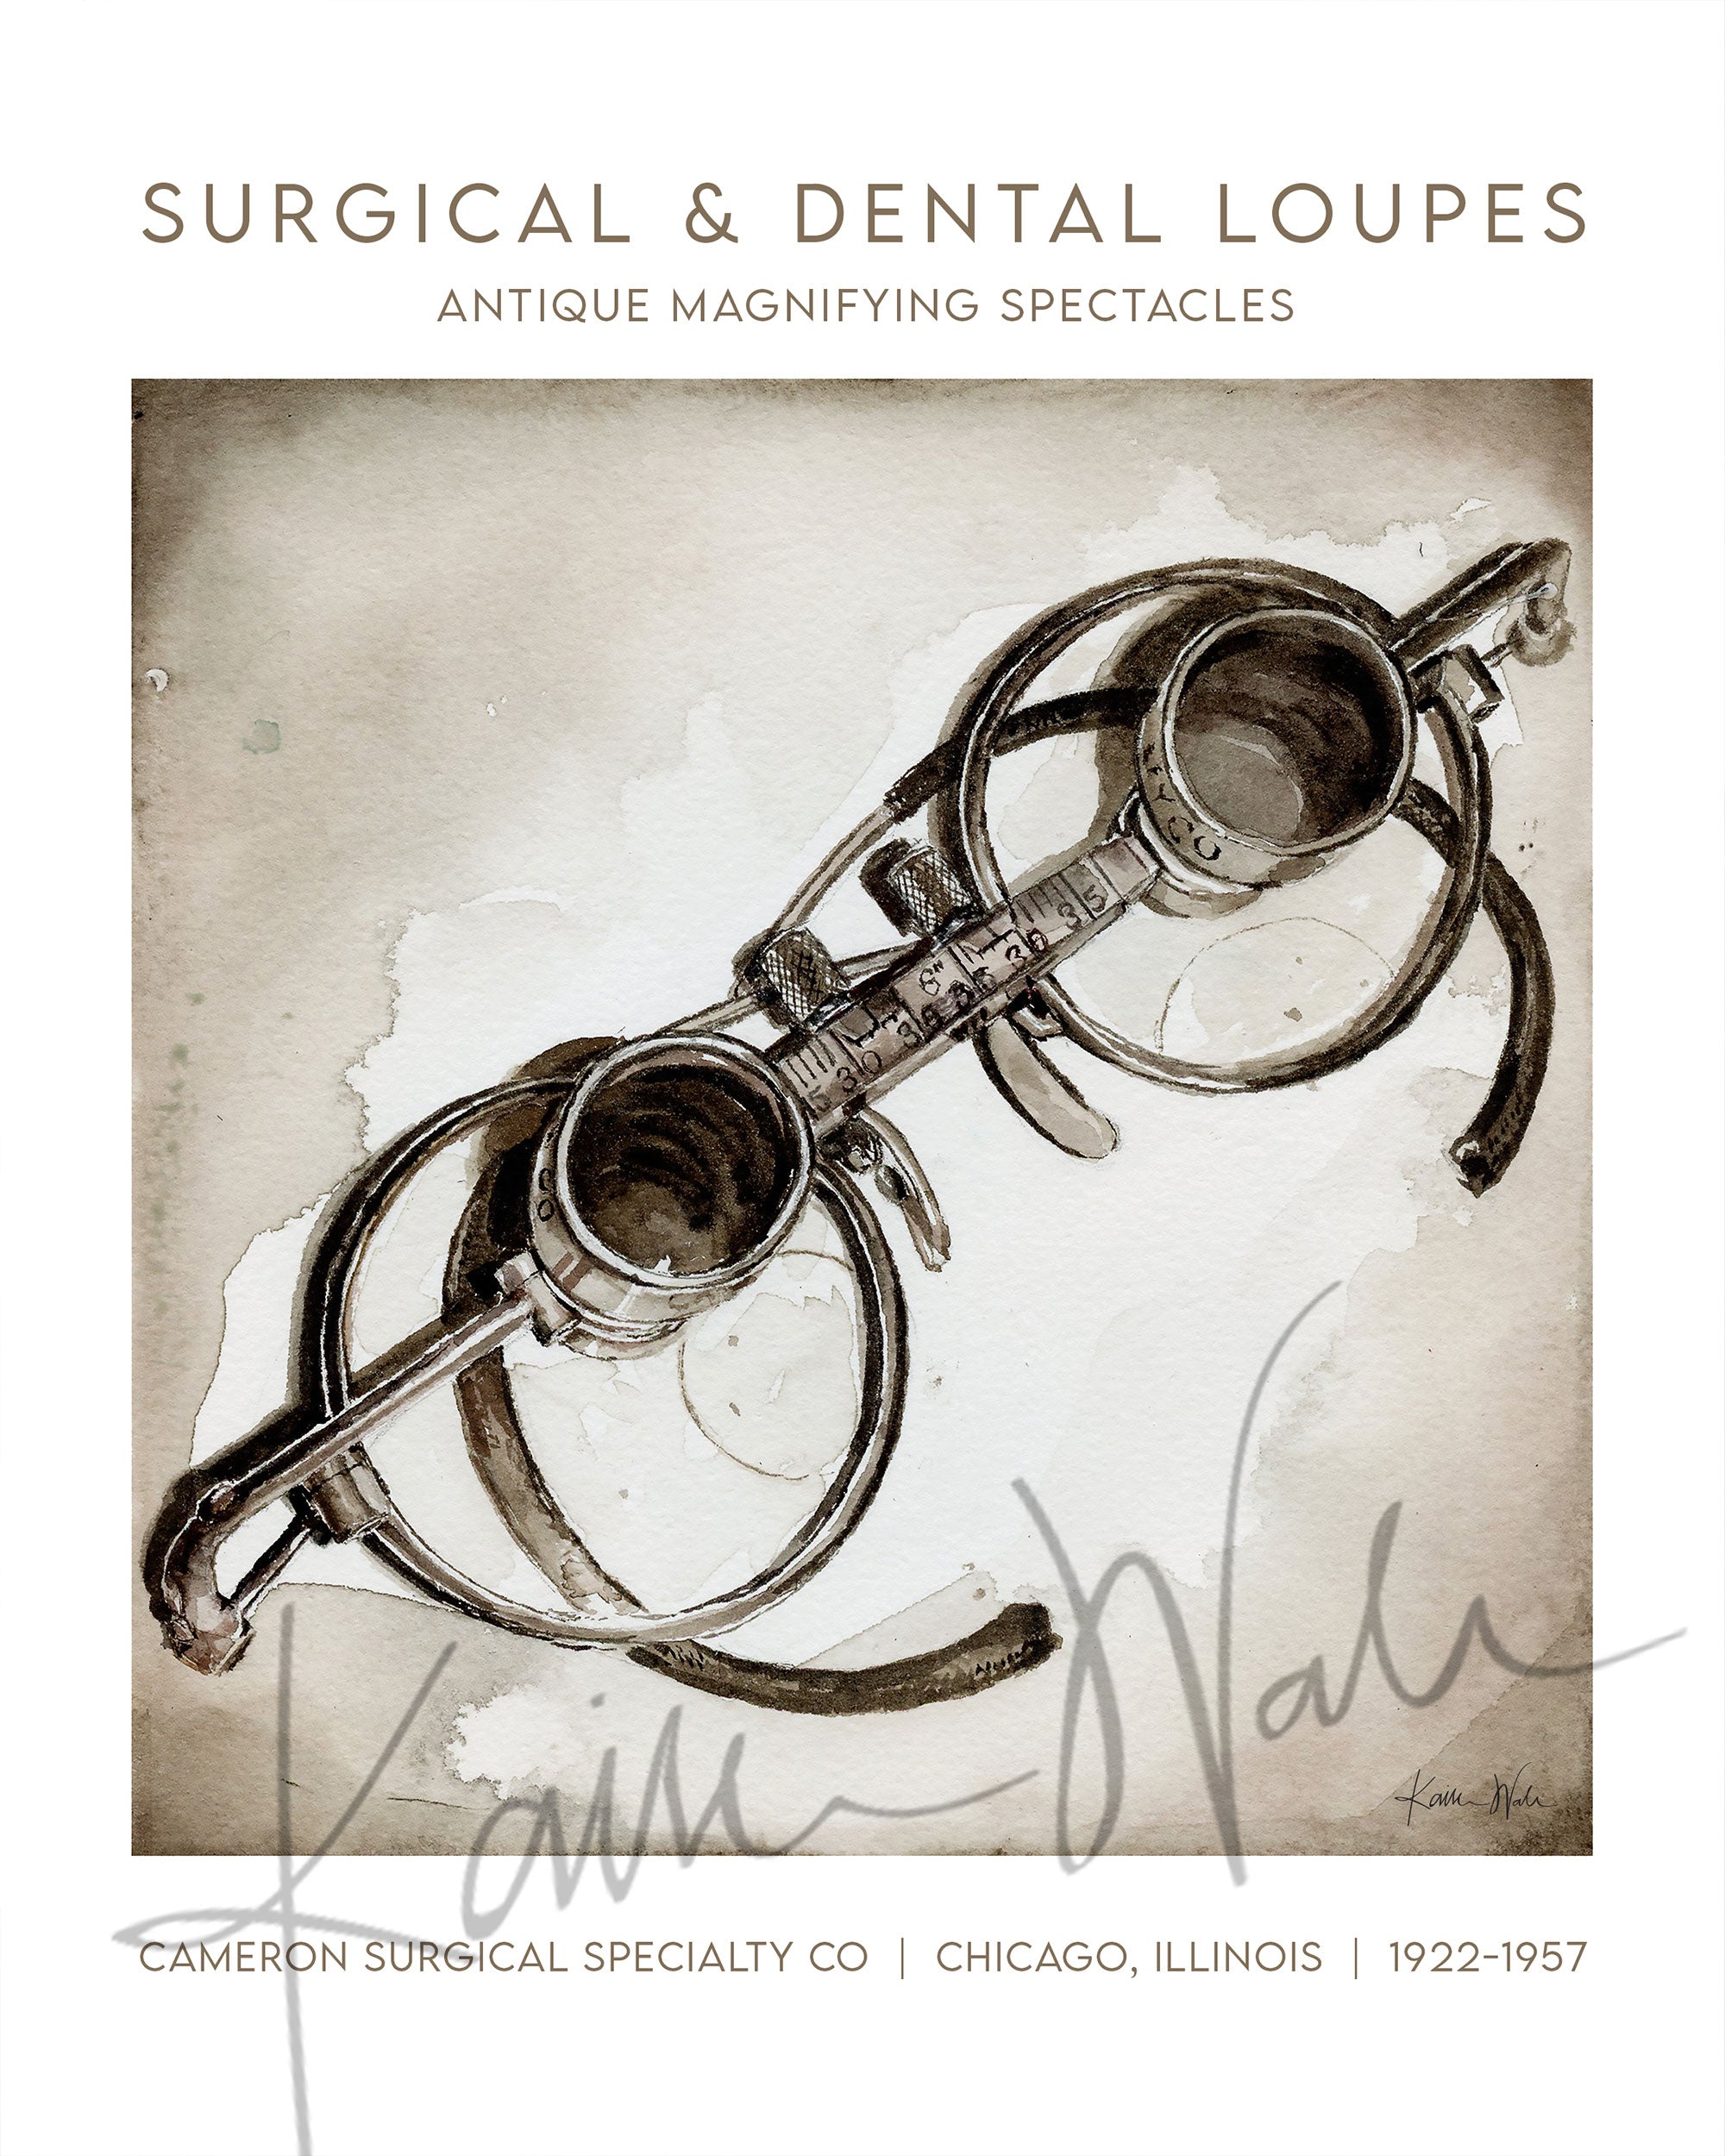 Unframed watercolor painting of antique style dental loupes.